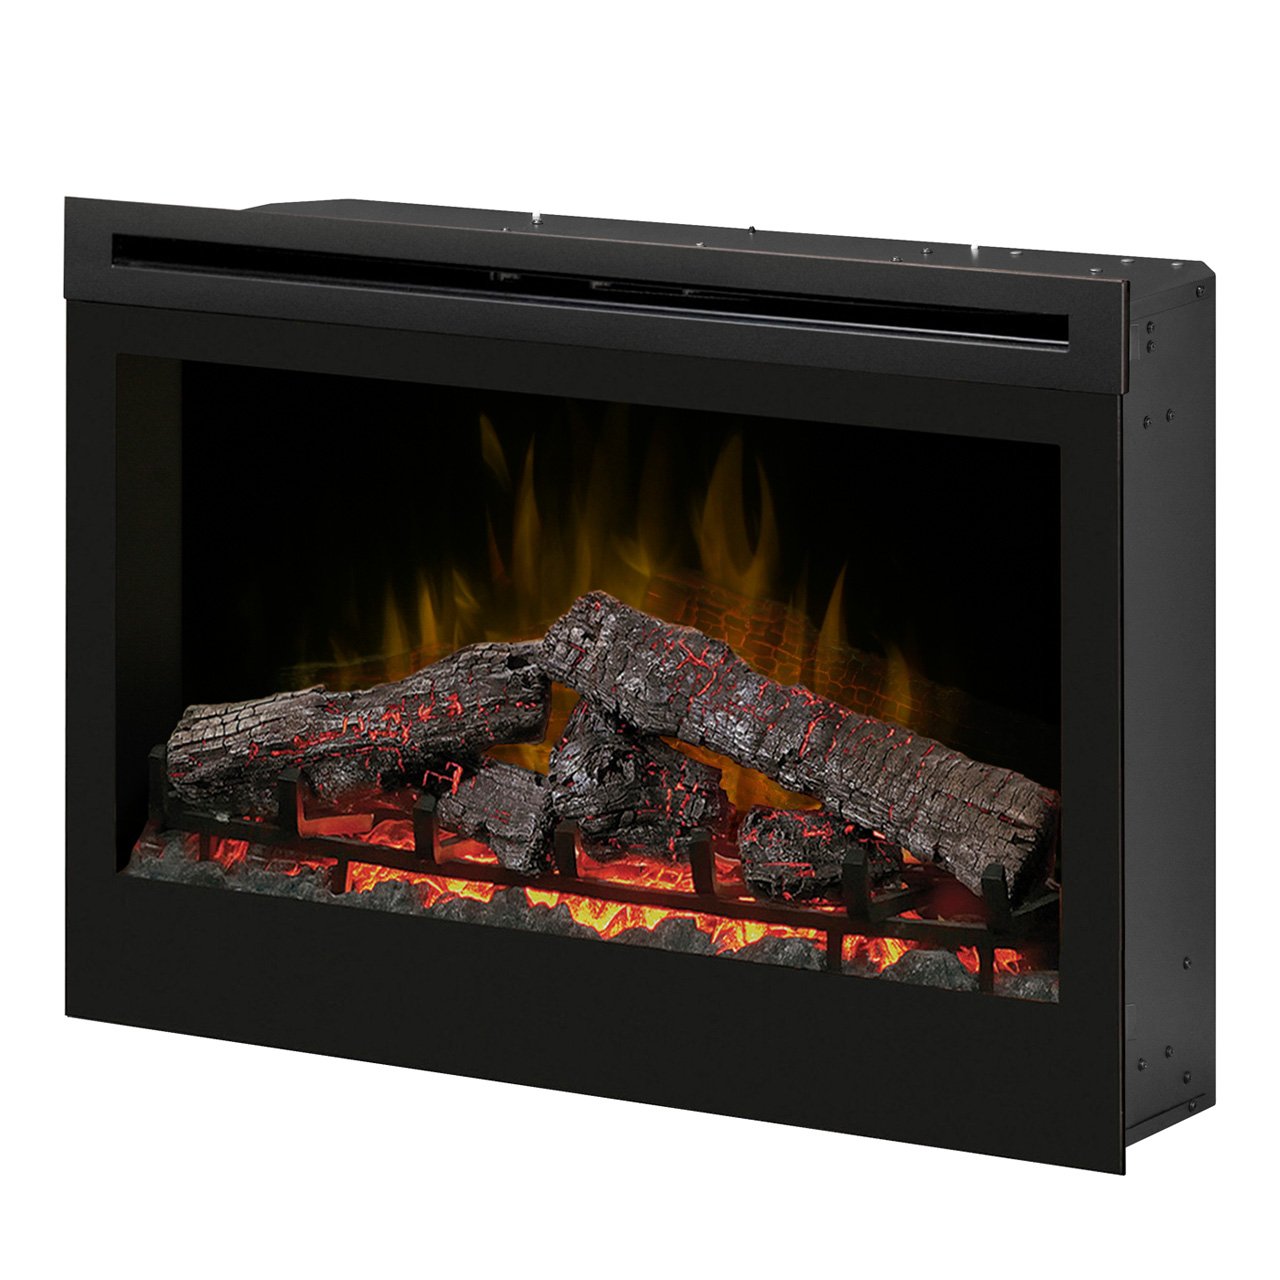 Electric Fireplace Reviews New Dimplex Df3033st 33 Inch Self Trimming Electric Fireplace Insert